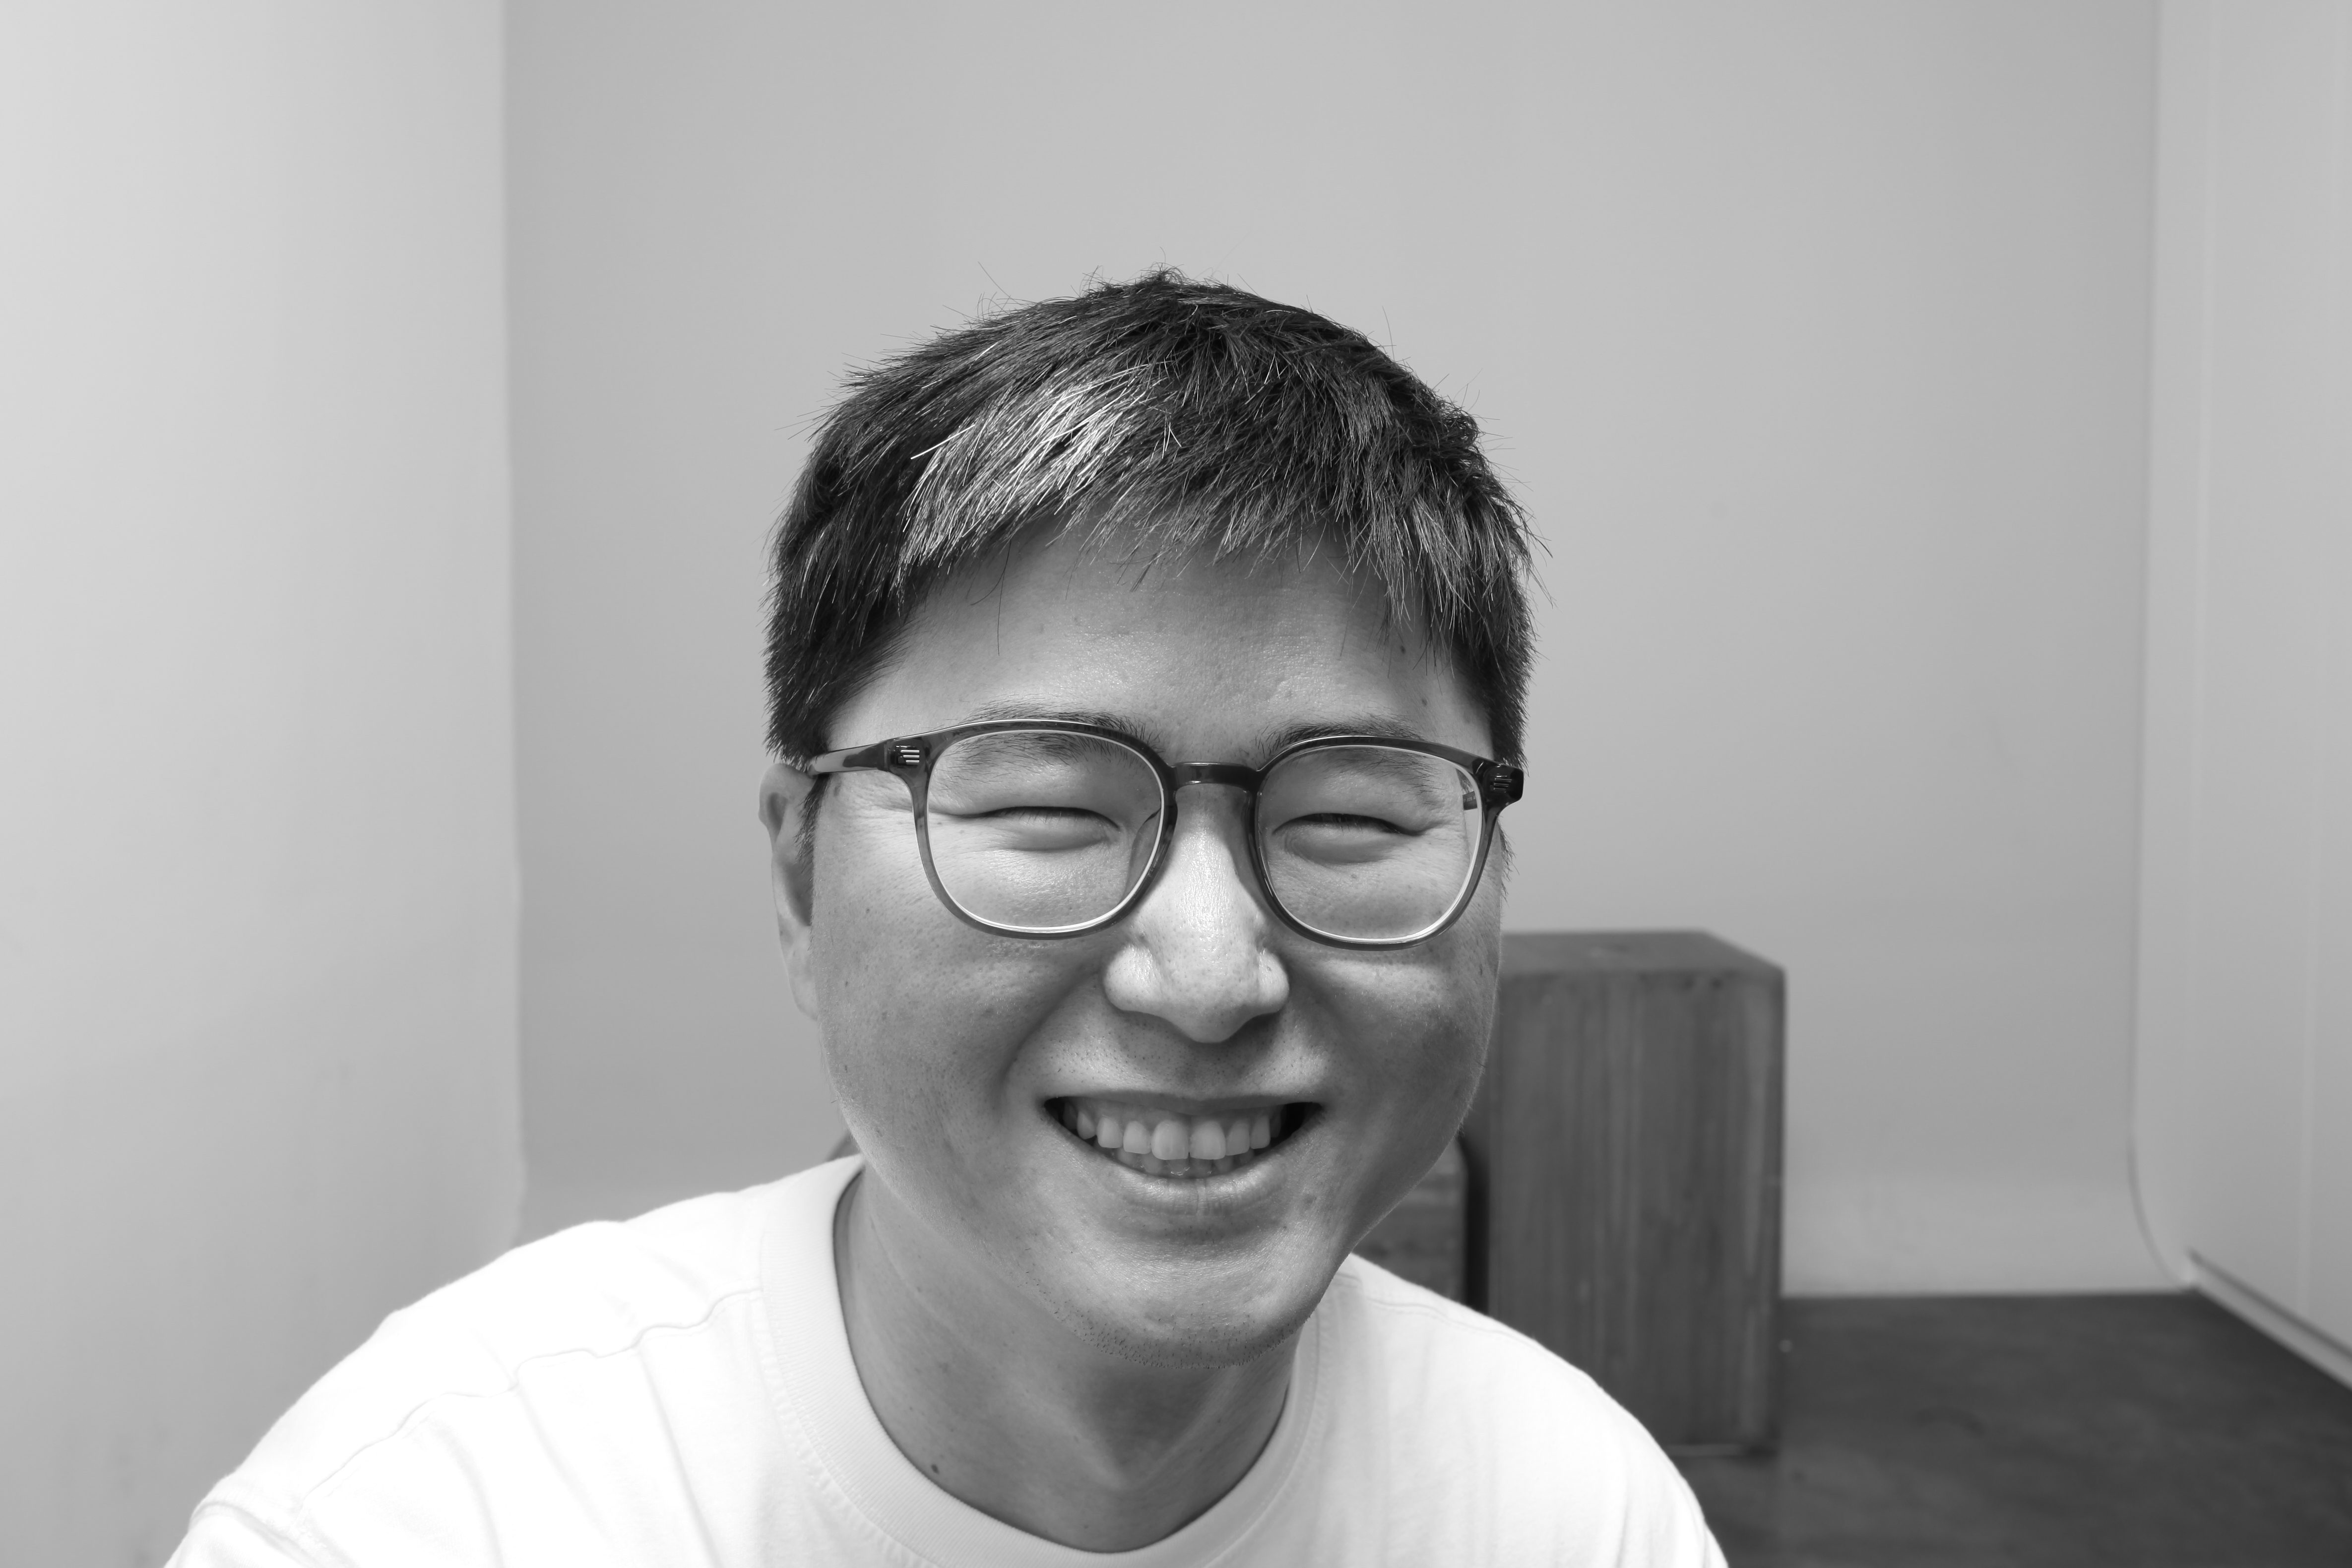 PAUL YOUNGMIN YOO – PhD Candidate in Education Policy and Social Contex